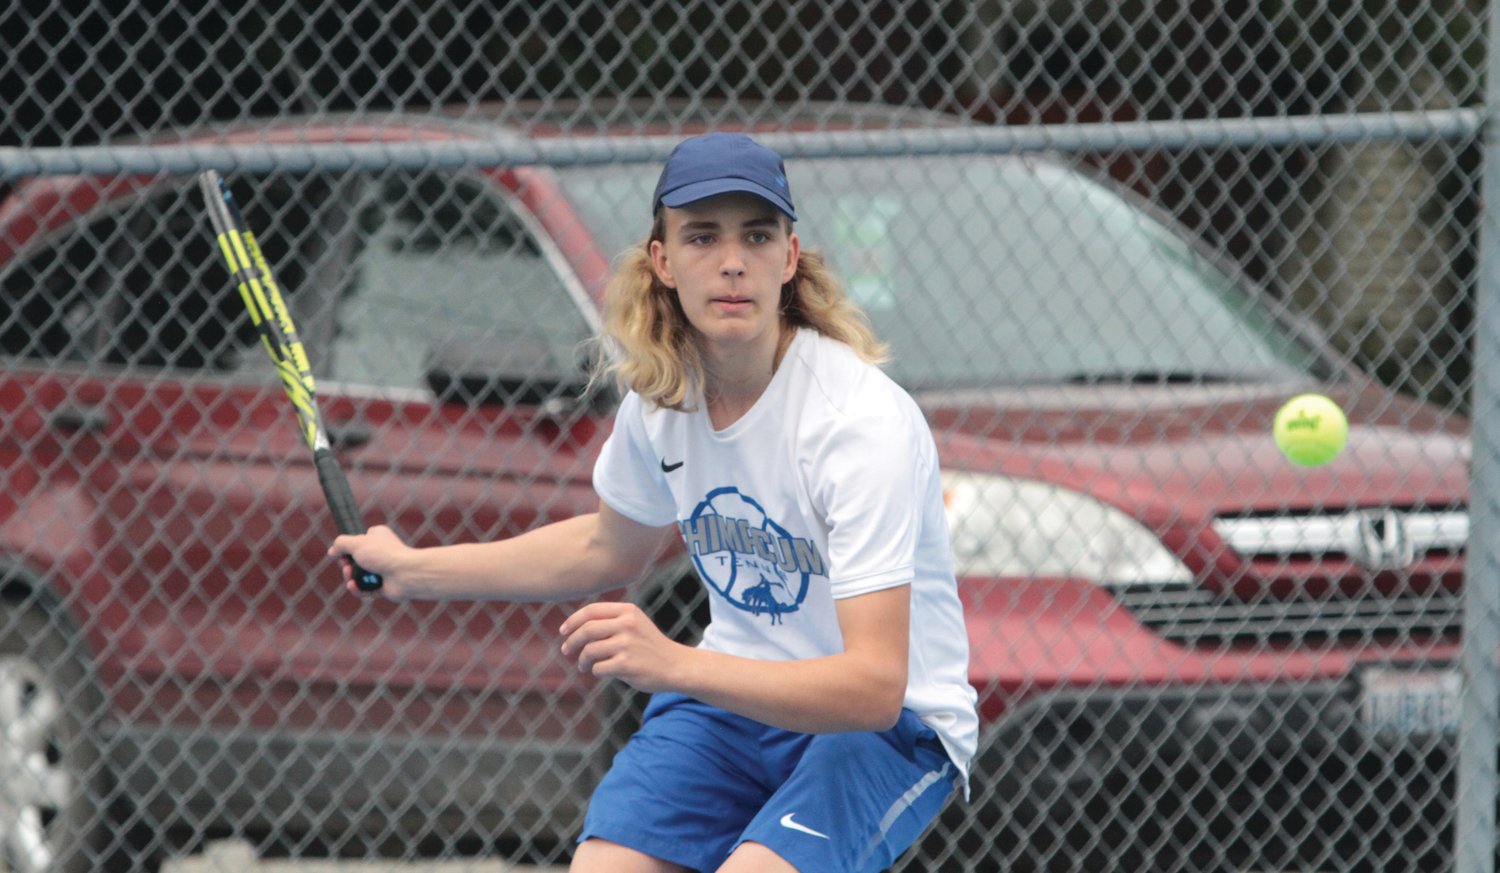 Reid Martin keeps his eyes on the ball during No. 1 singles at the recent matchup against Annie Wright School’s Owen Hayes in boys varsity tennis.